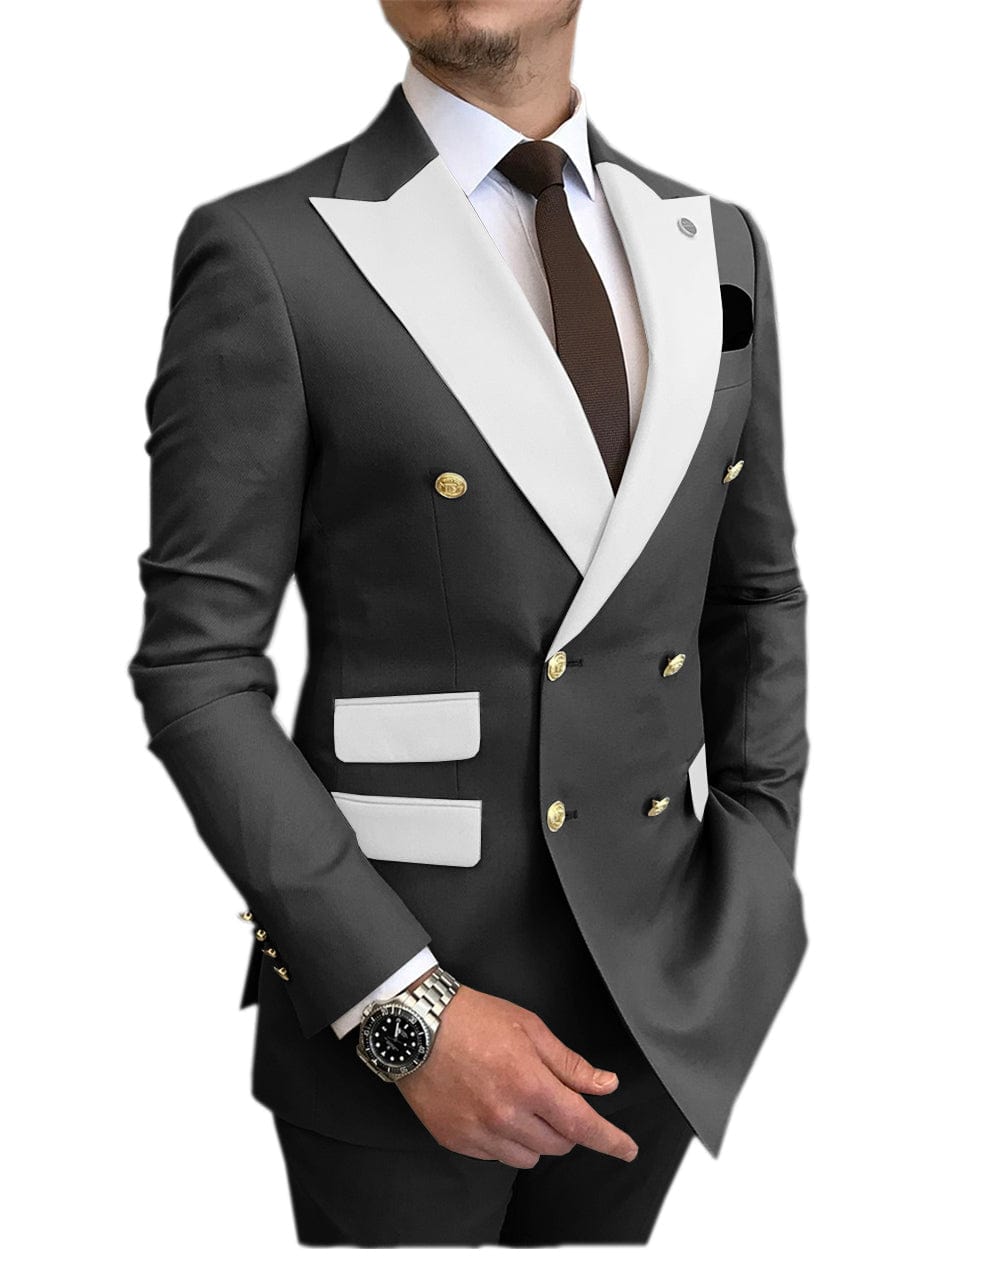 ceehuteey Men's Suit Casual  Double Breasted 2 Piece Business Wedding (Blazer+Pants)